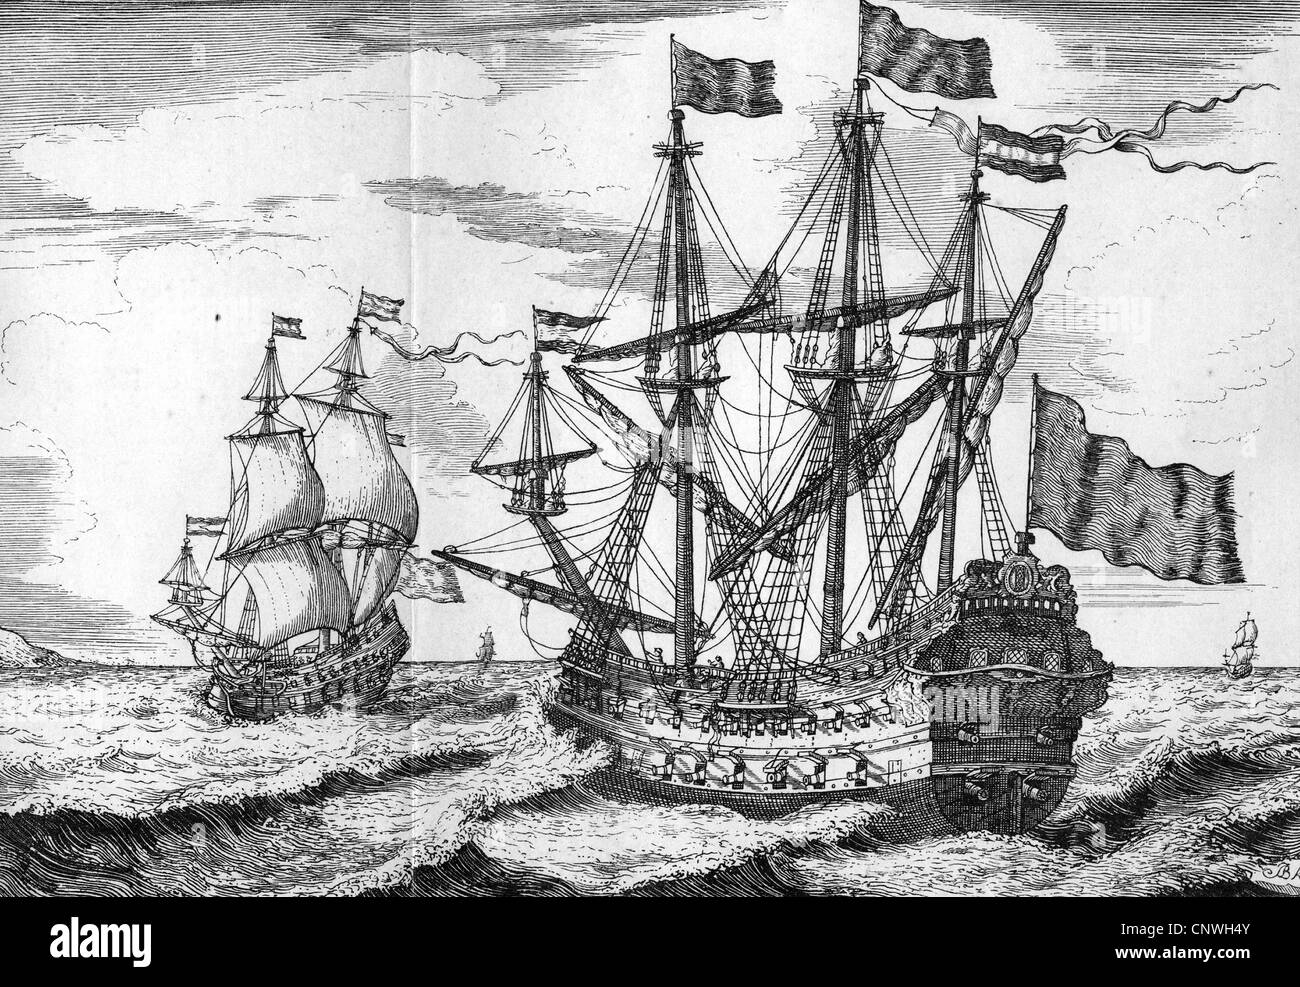 transport / transportation, navigation, warships, Dutch battleship, second half of the 17th century, etching by Ludolf Barthuizen (1631 - 1708), threemasted vessel, warship, warships, sailing ship, sail, sailing ships, sails, Netherlands, colonialism, trade, historic, historical, Additional-Rights-Clearences-Not Available Stock Photo